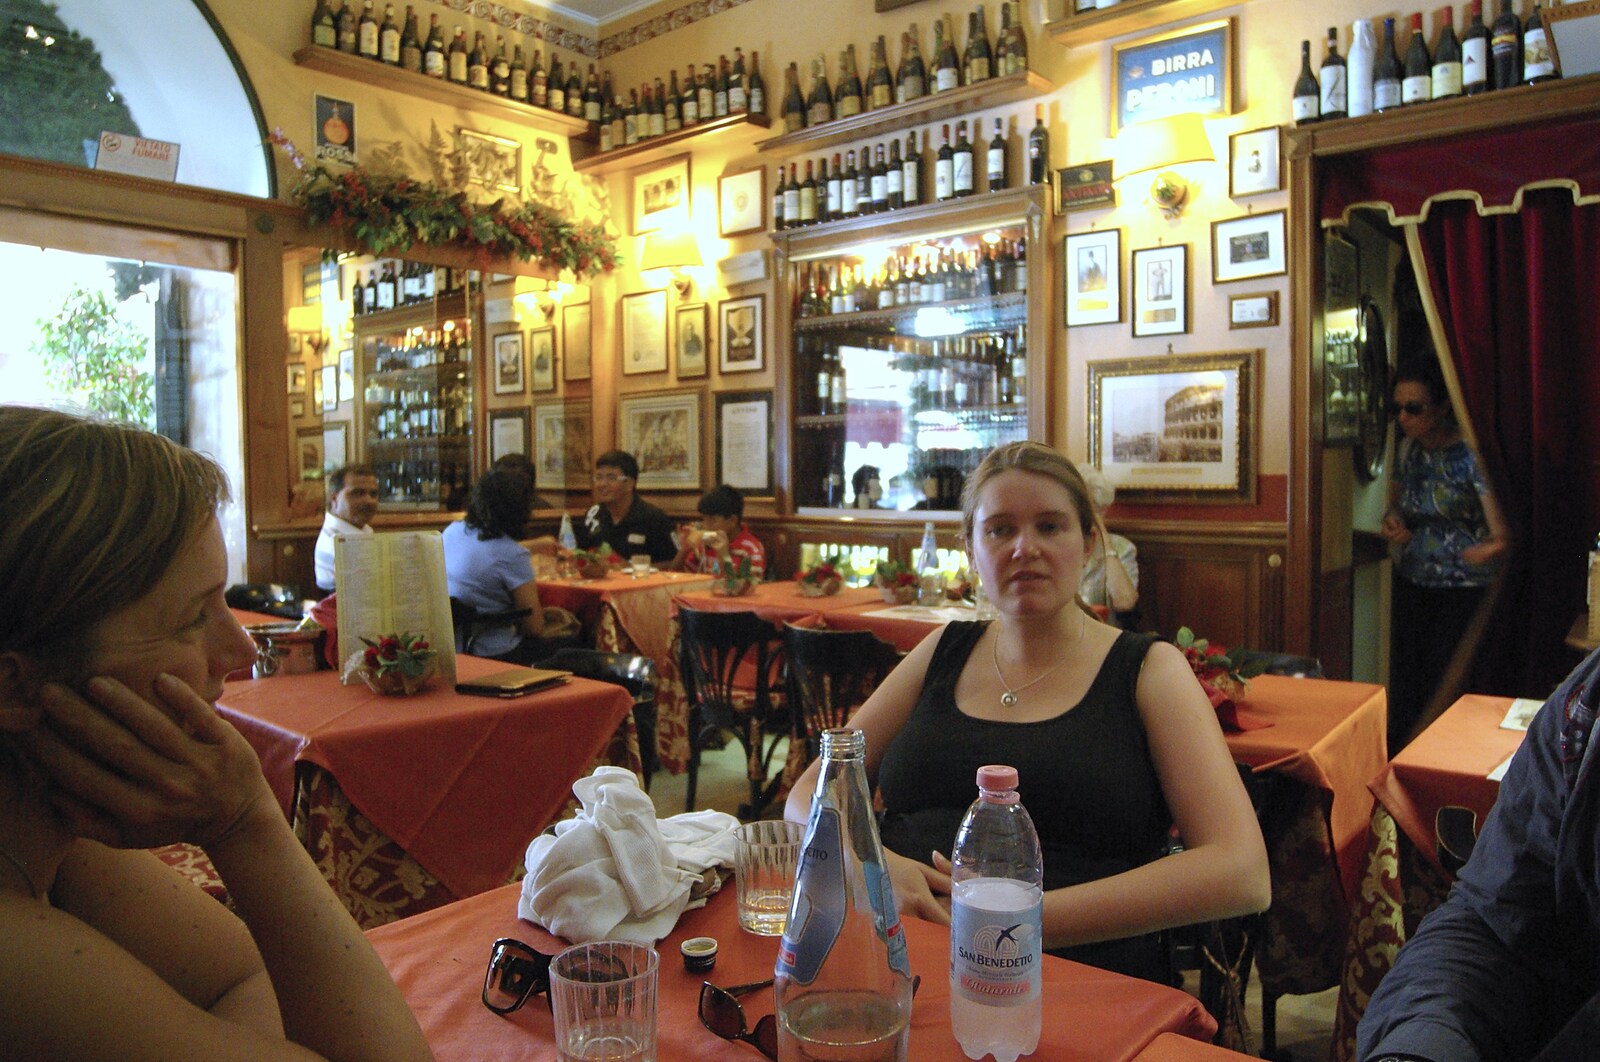 Jules and Isobel in a bar from A Sojourn in The Eternal City, Rome, Italy - 22nd July 2008